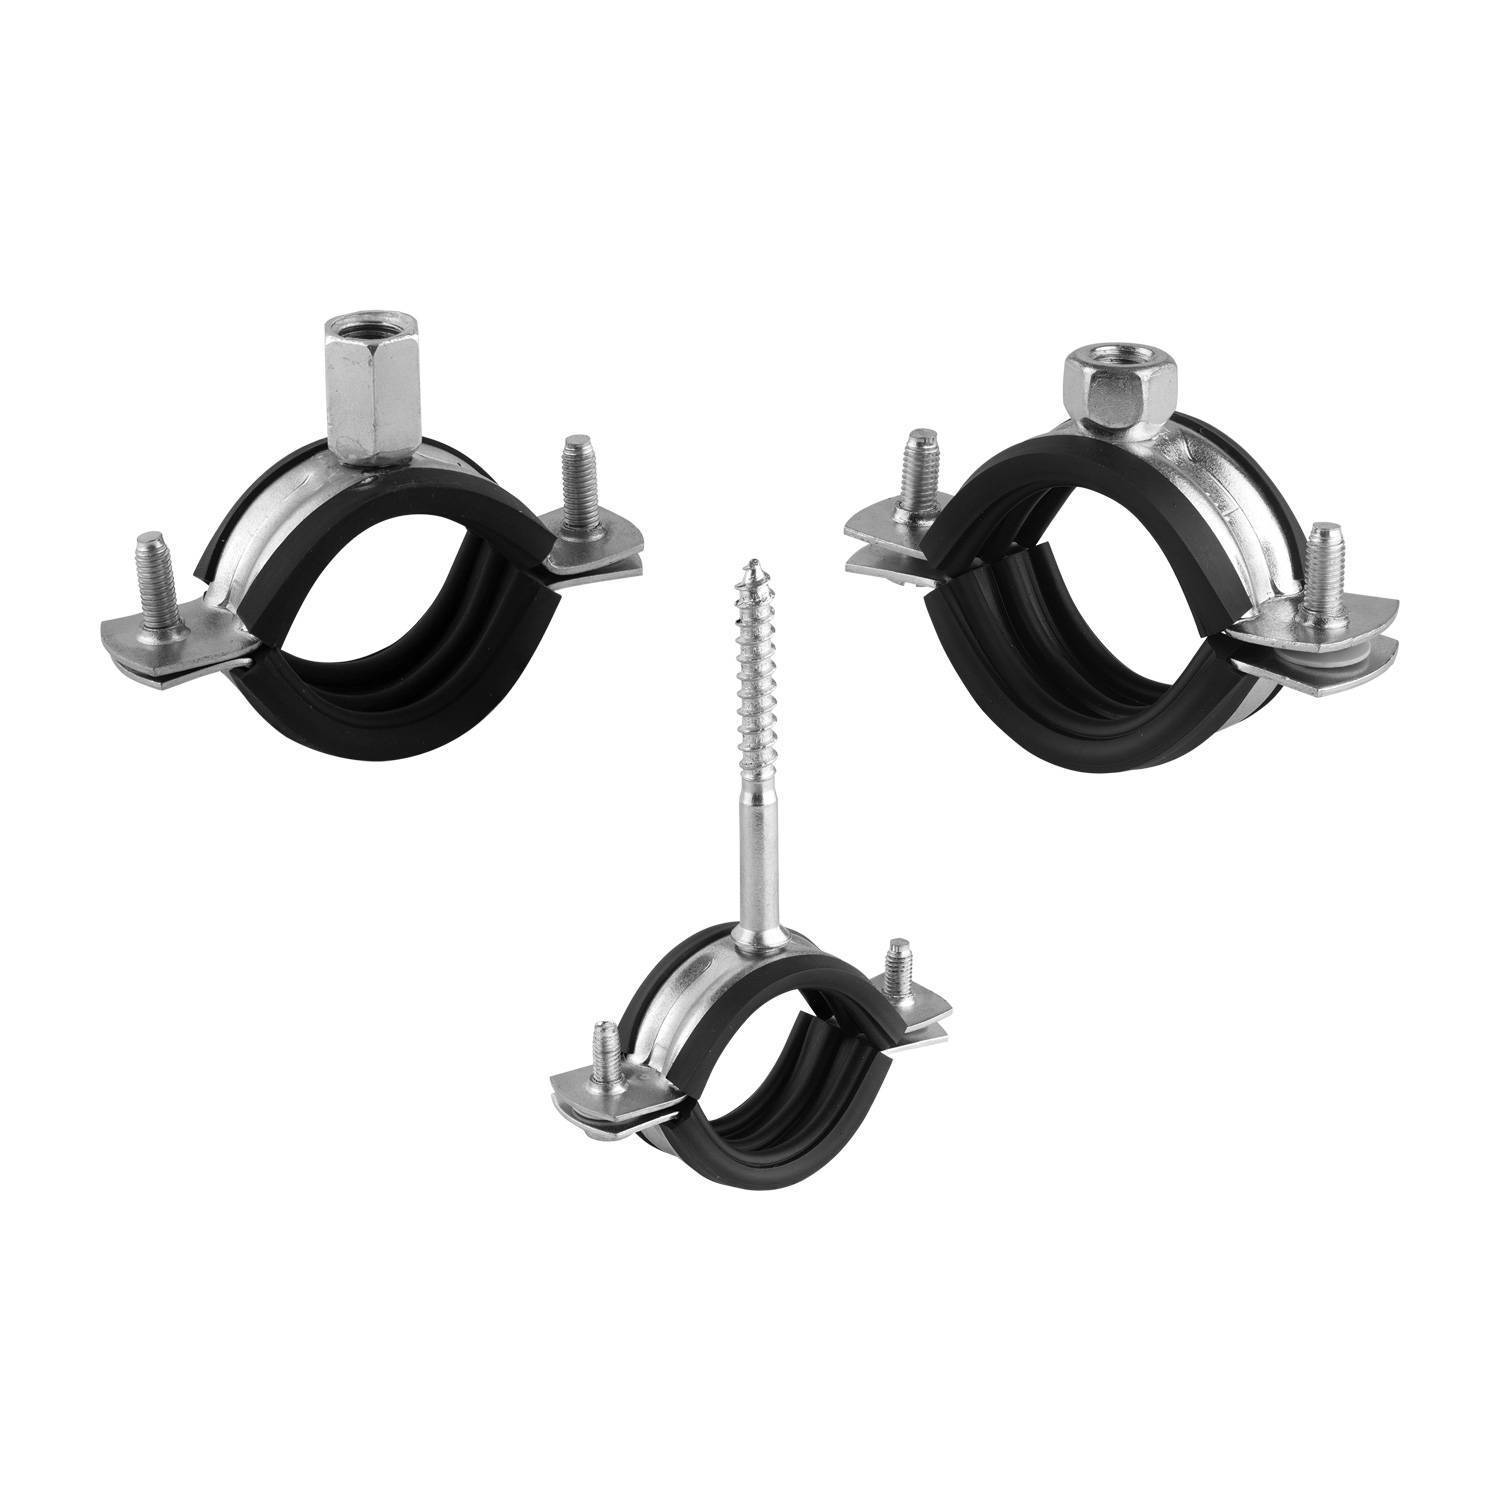 FOR PVC PIPE CLAMPS WITH RUBBER